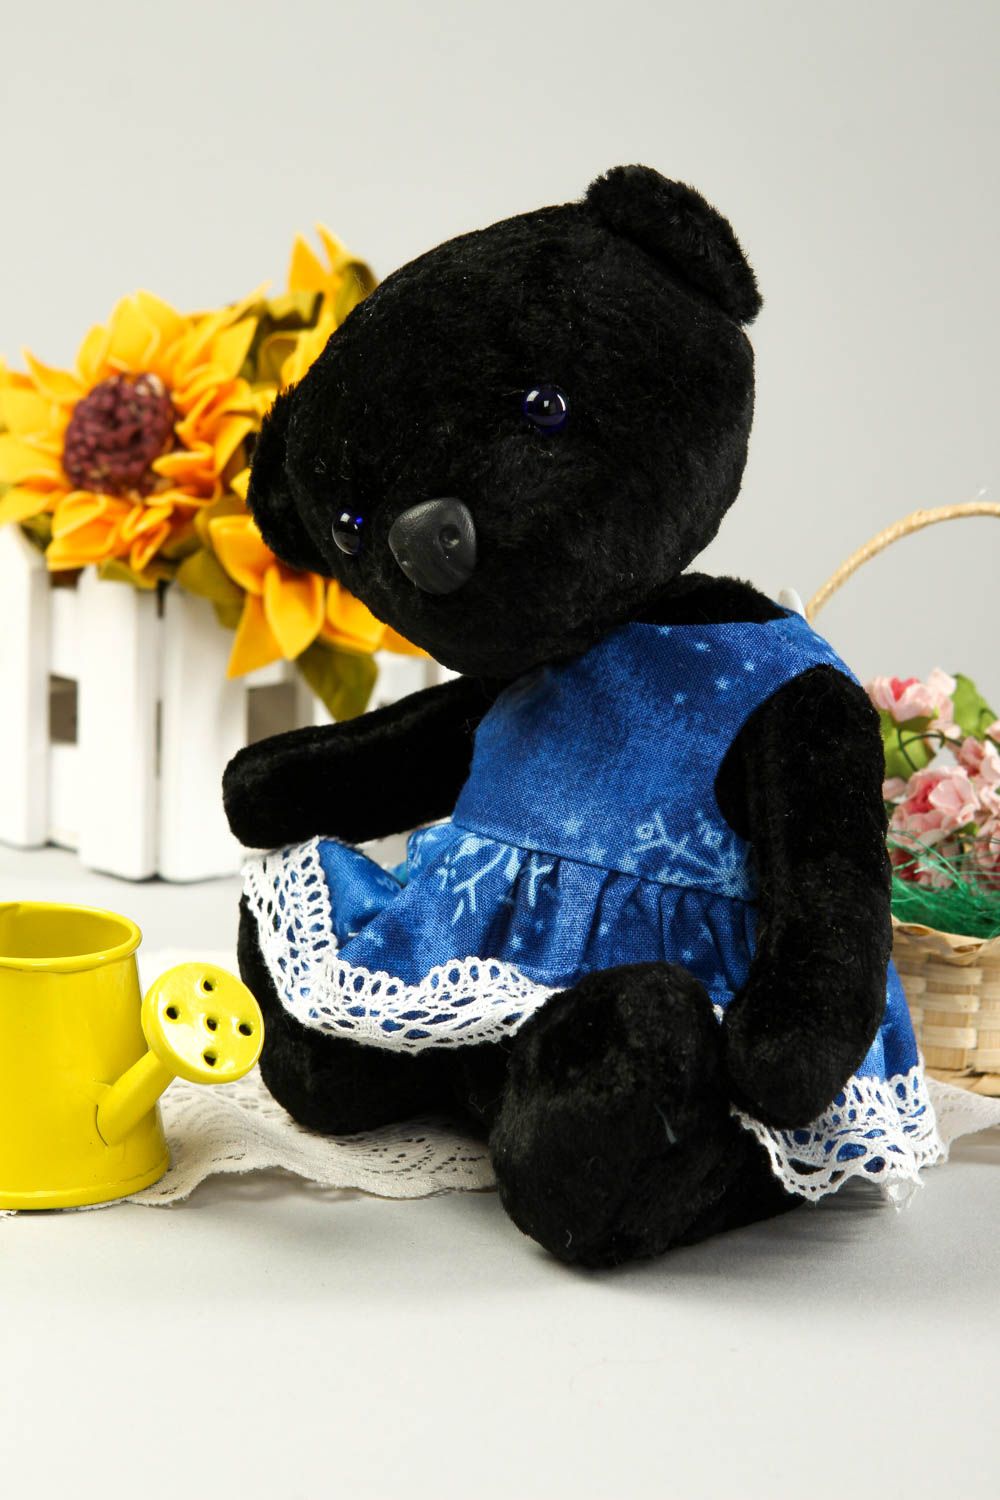 Handmade soft toy bear toy homemade toys nursery decor presents for toddlers photo 1